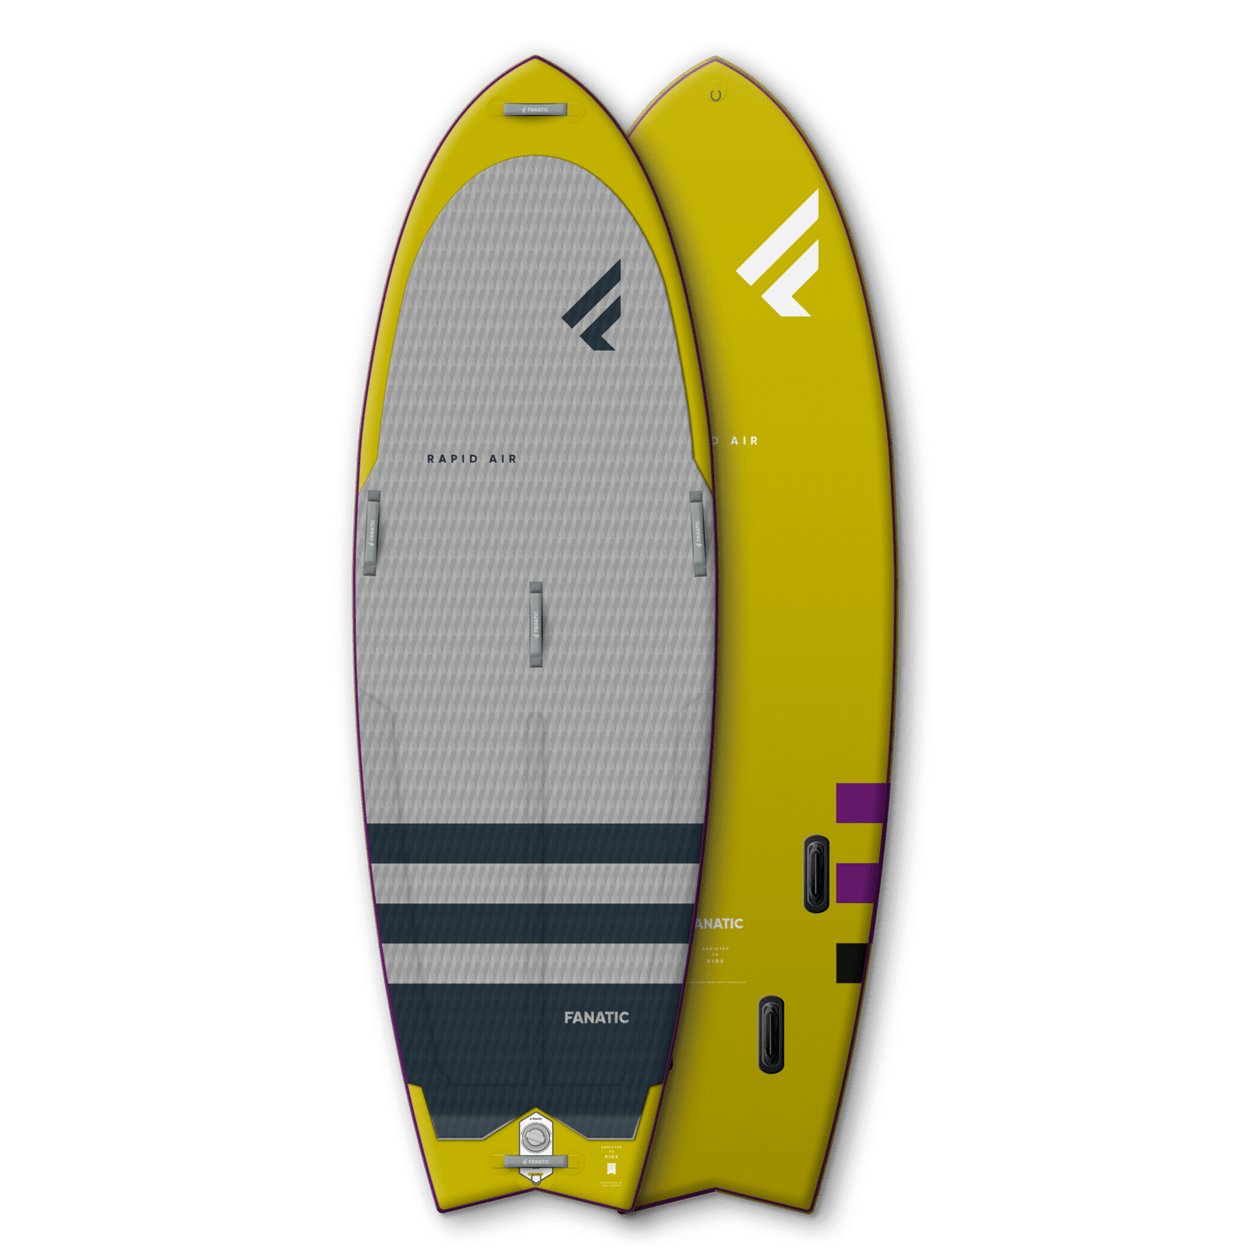 Fanatic Rapid Air Premium 2022 - Worthing Watersports - 9008415930494 - SUP Inflatables - Fanatic SUP